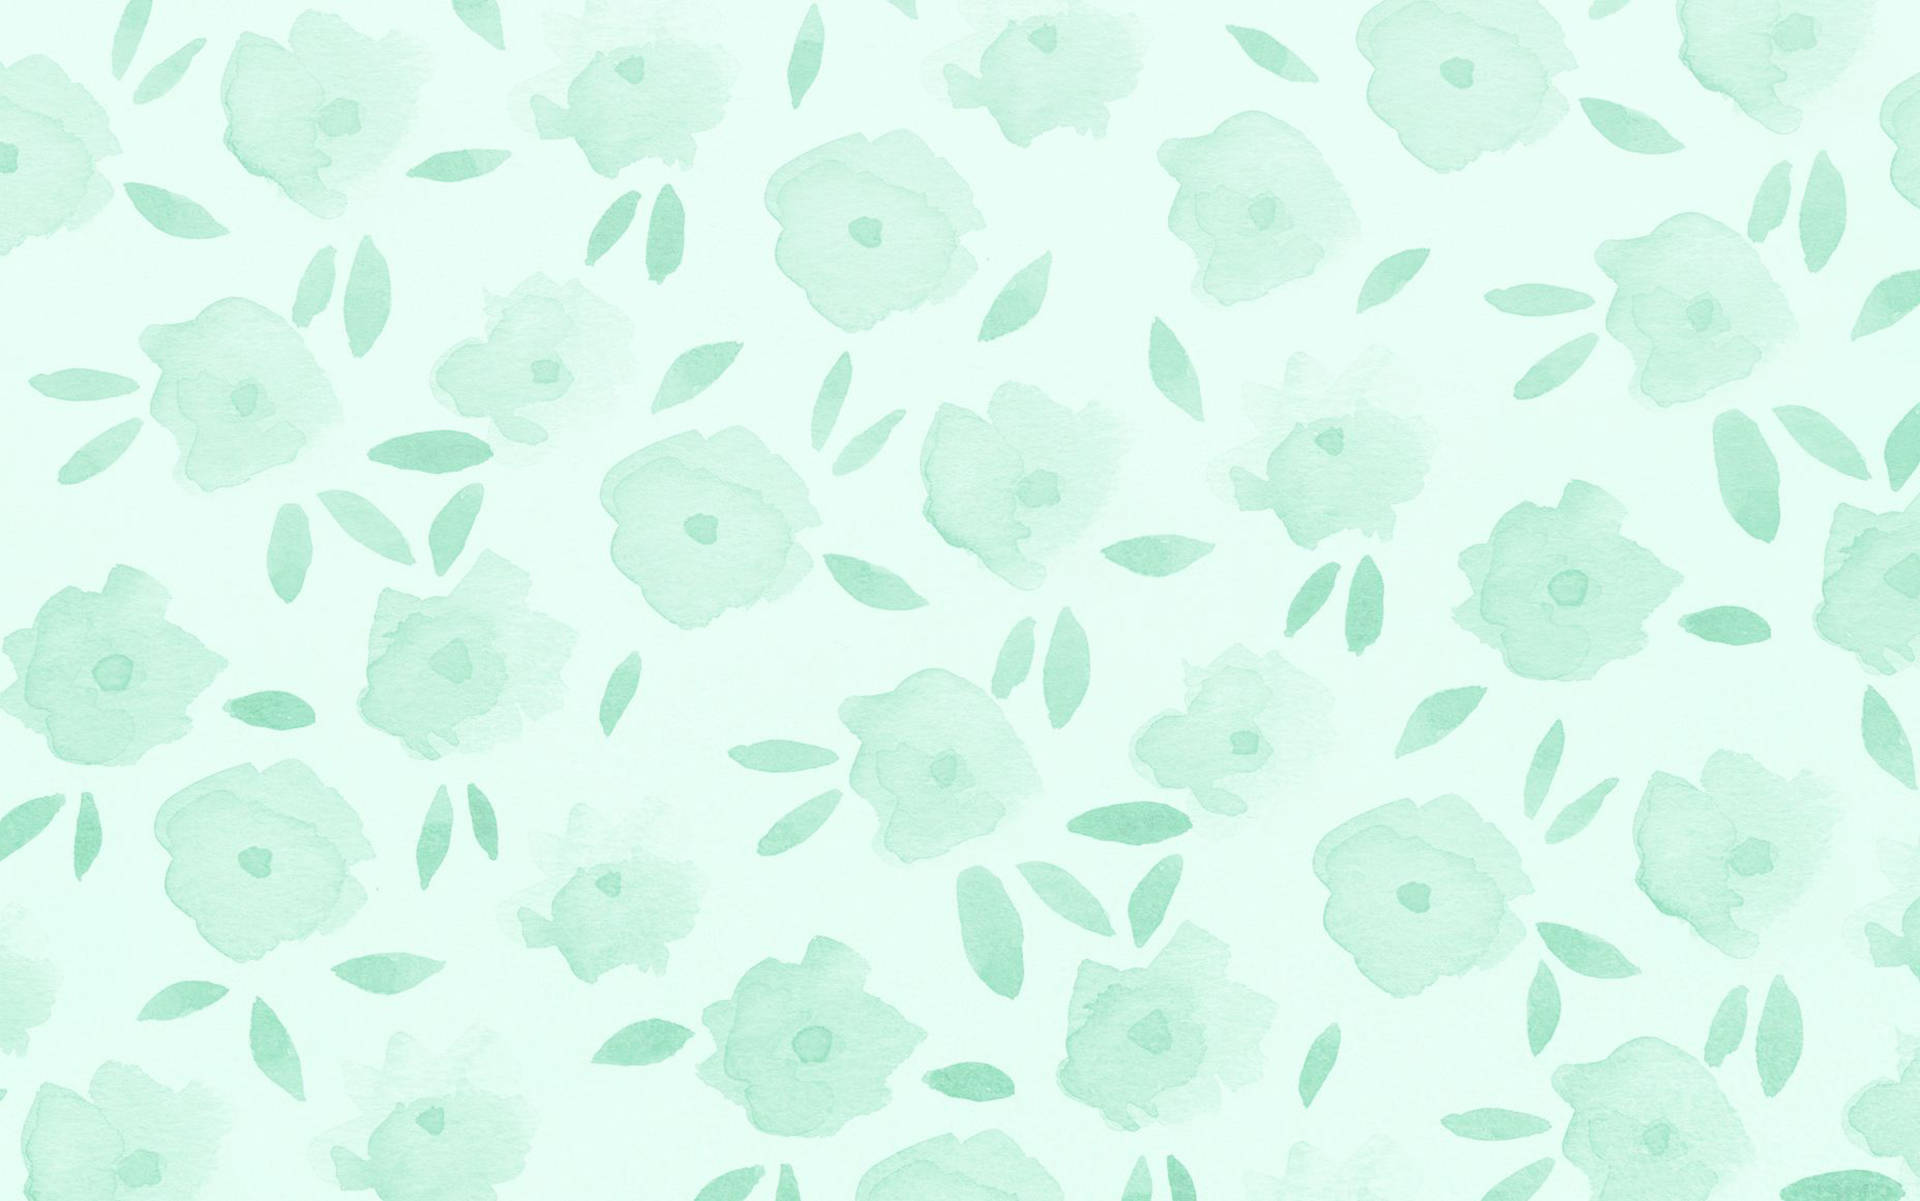 A chic, pastel green laptop perfect for those looking to add some aesthetic flair to their work or study space. Wallpaper